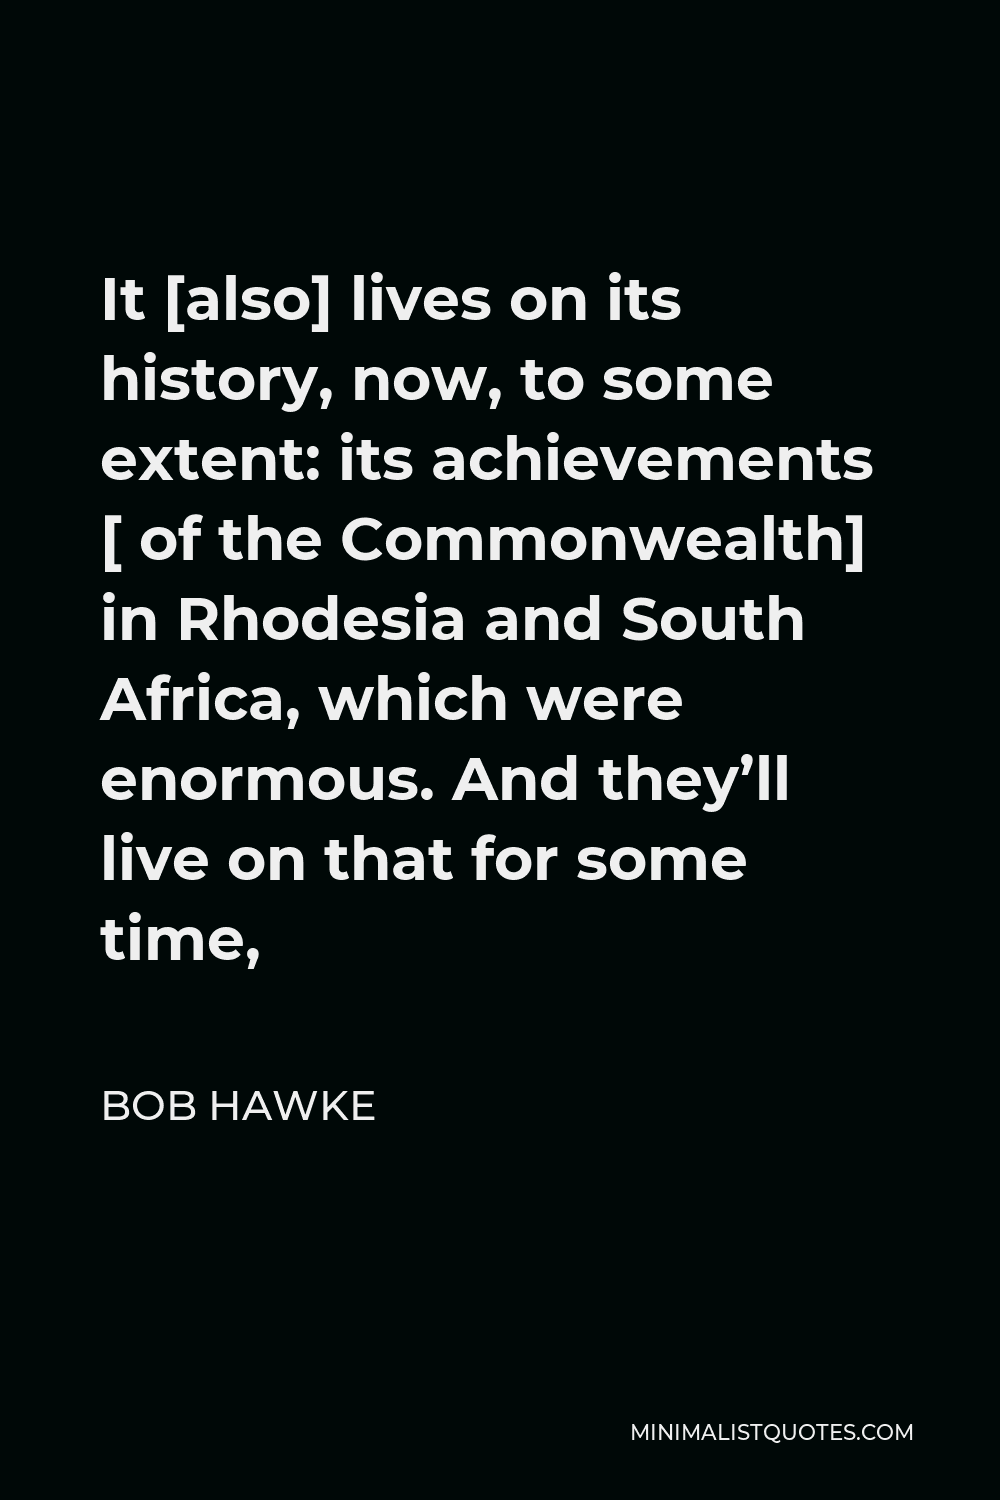 Bob Hawke Quote - It [also] lives on its history, now, to some extent: its achievements [ of the Commonwealth] in Rhodesia and South Africa, which were enormous. And they’ll live on that for some time,